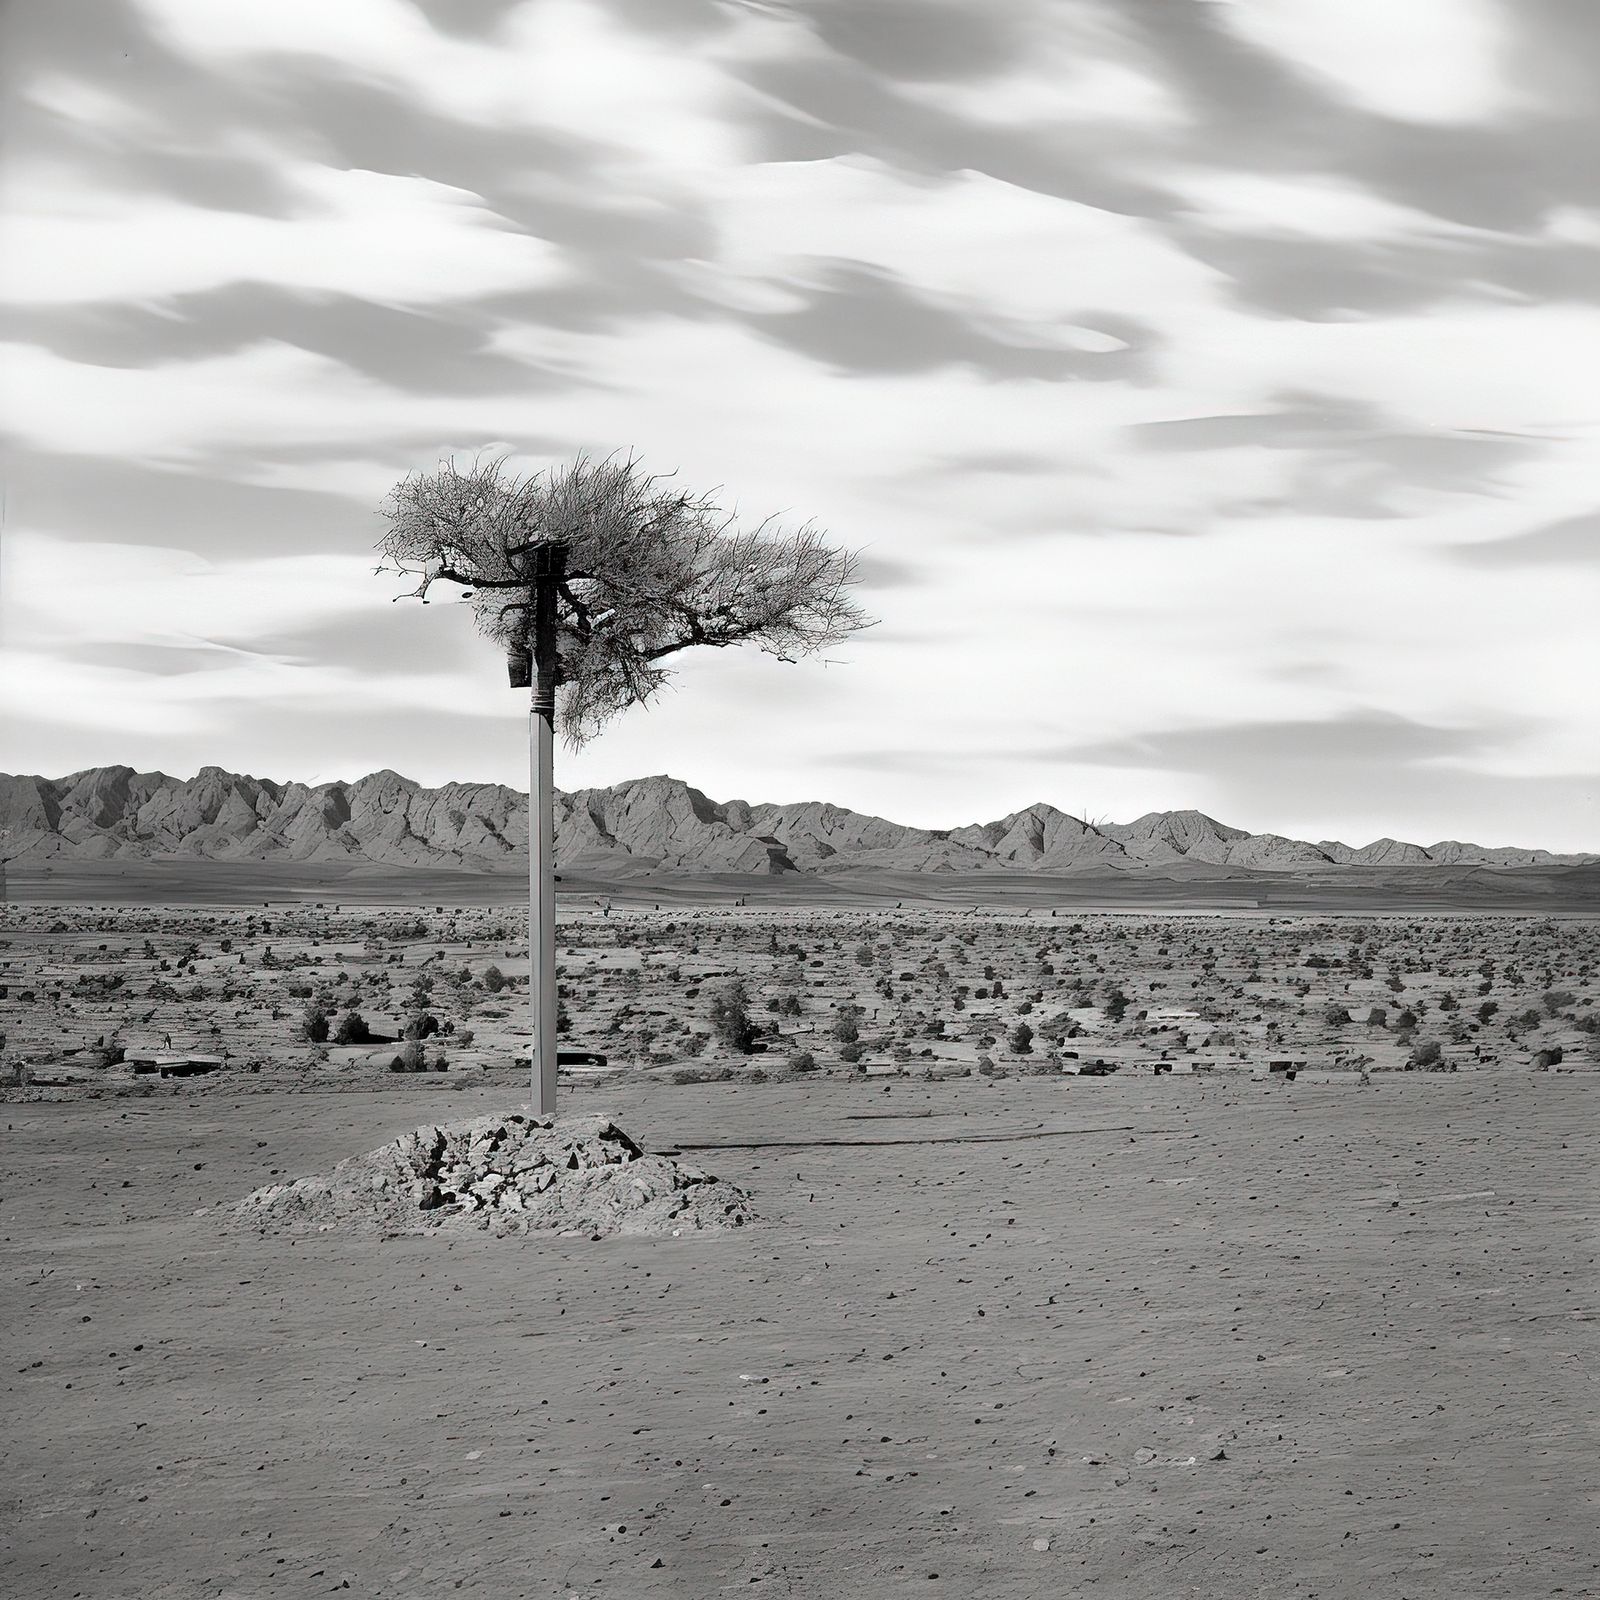 © Craig Ames - Untitled View (Albuquerque) [3]. (Possibly After Joe Deal)